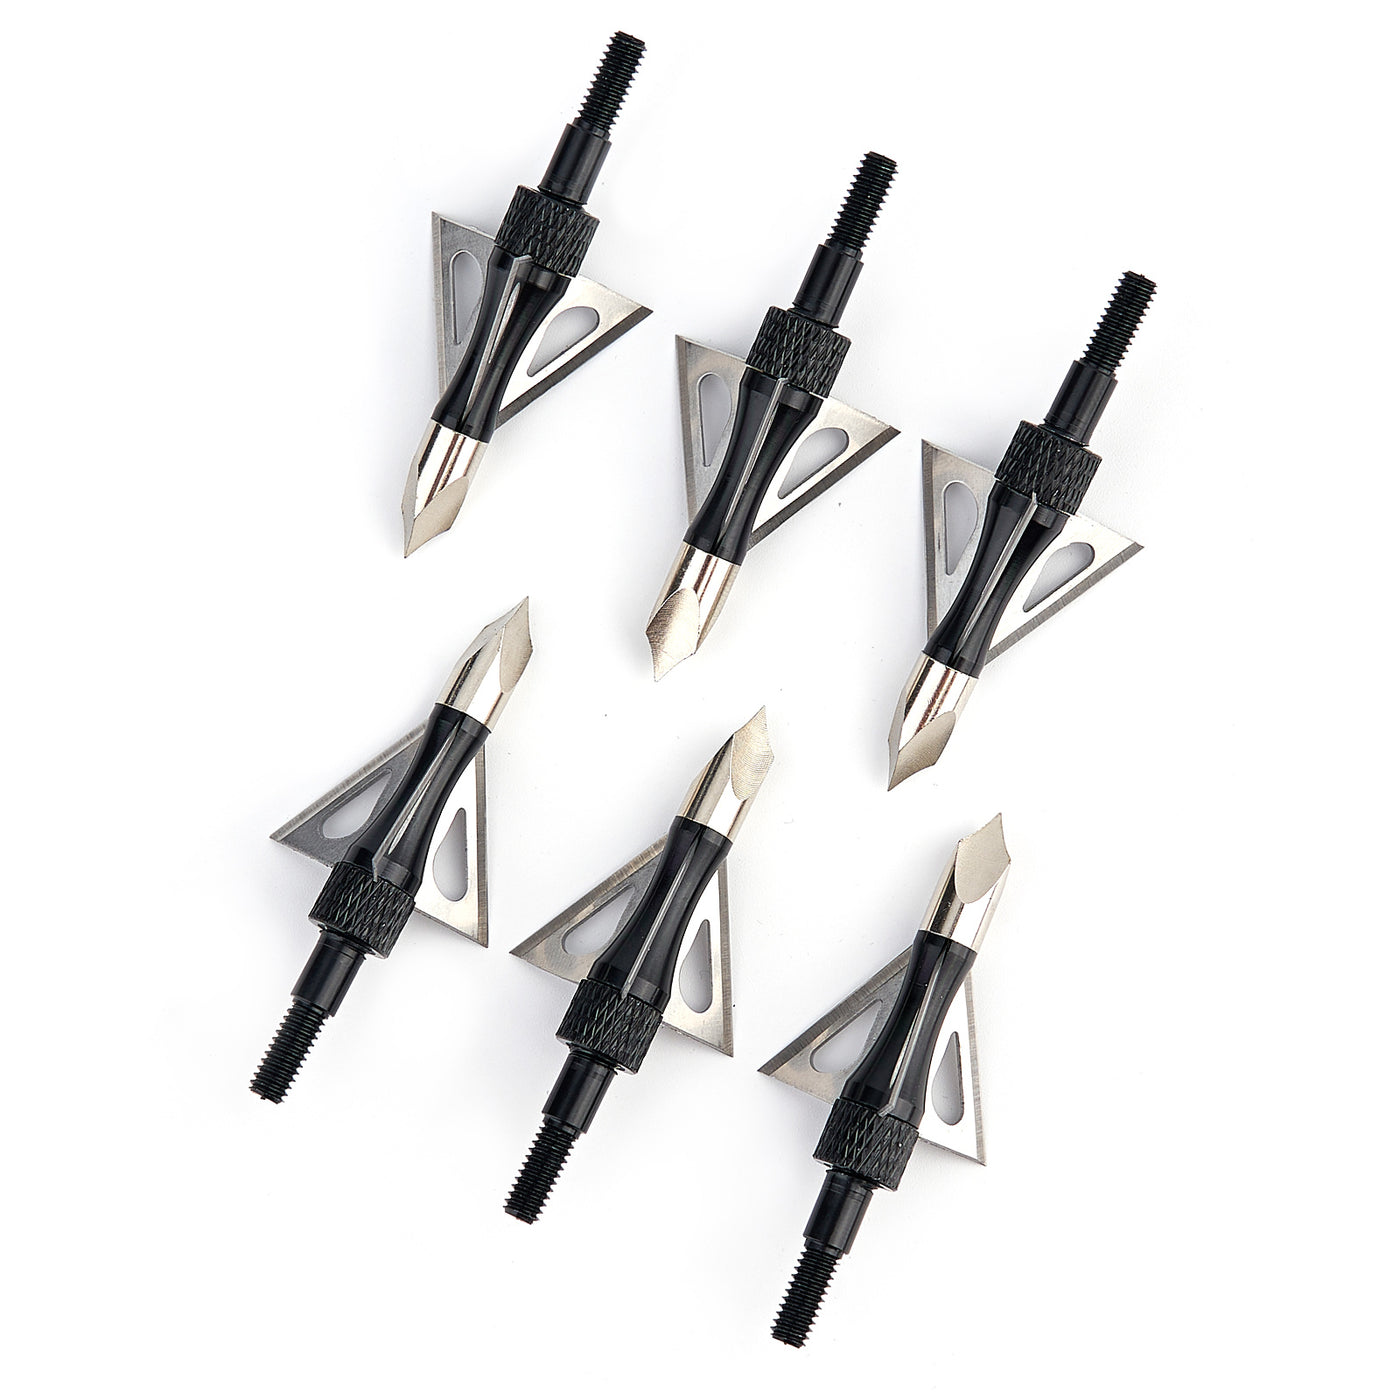 12x 100-grain Archery Black/Silver Screw-in Broadheads with Alloy Box For Hunting